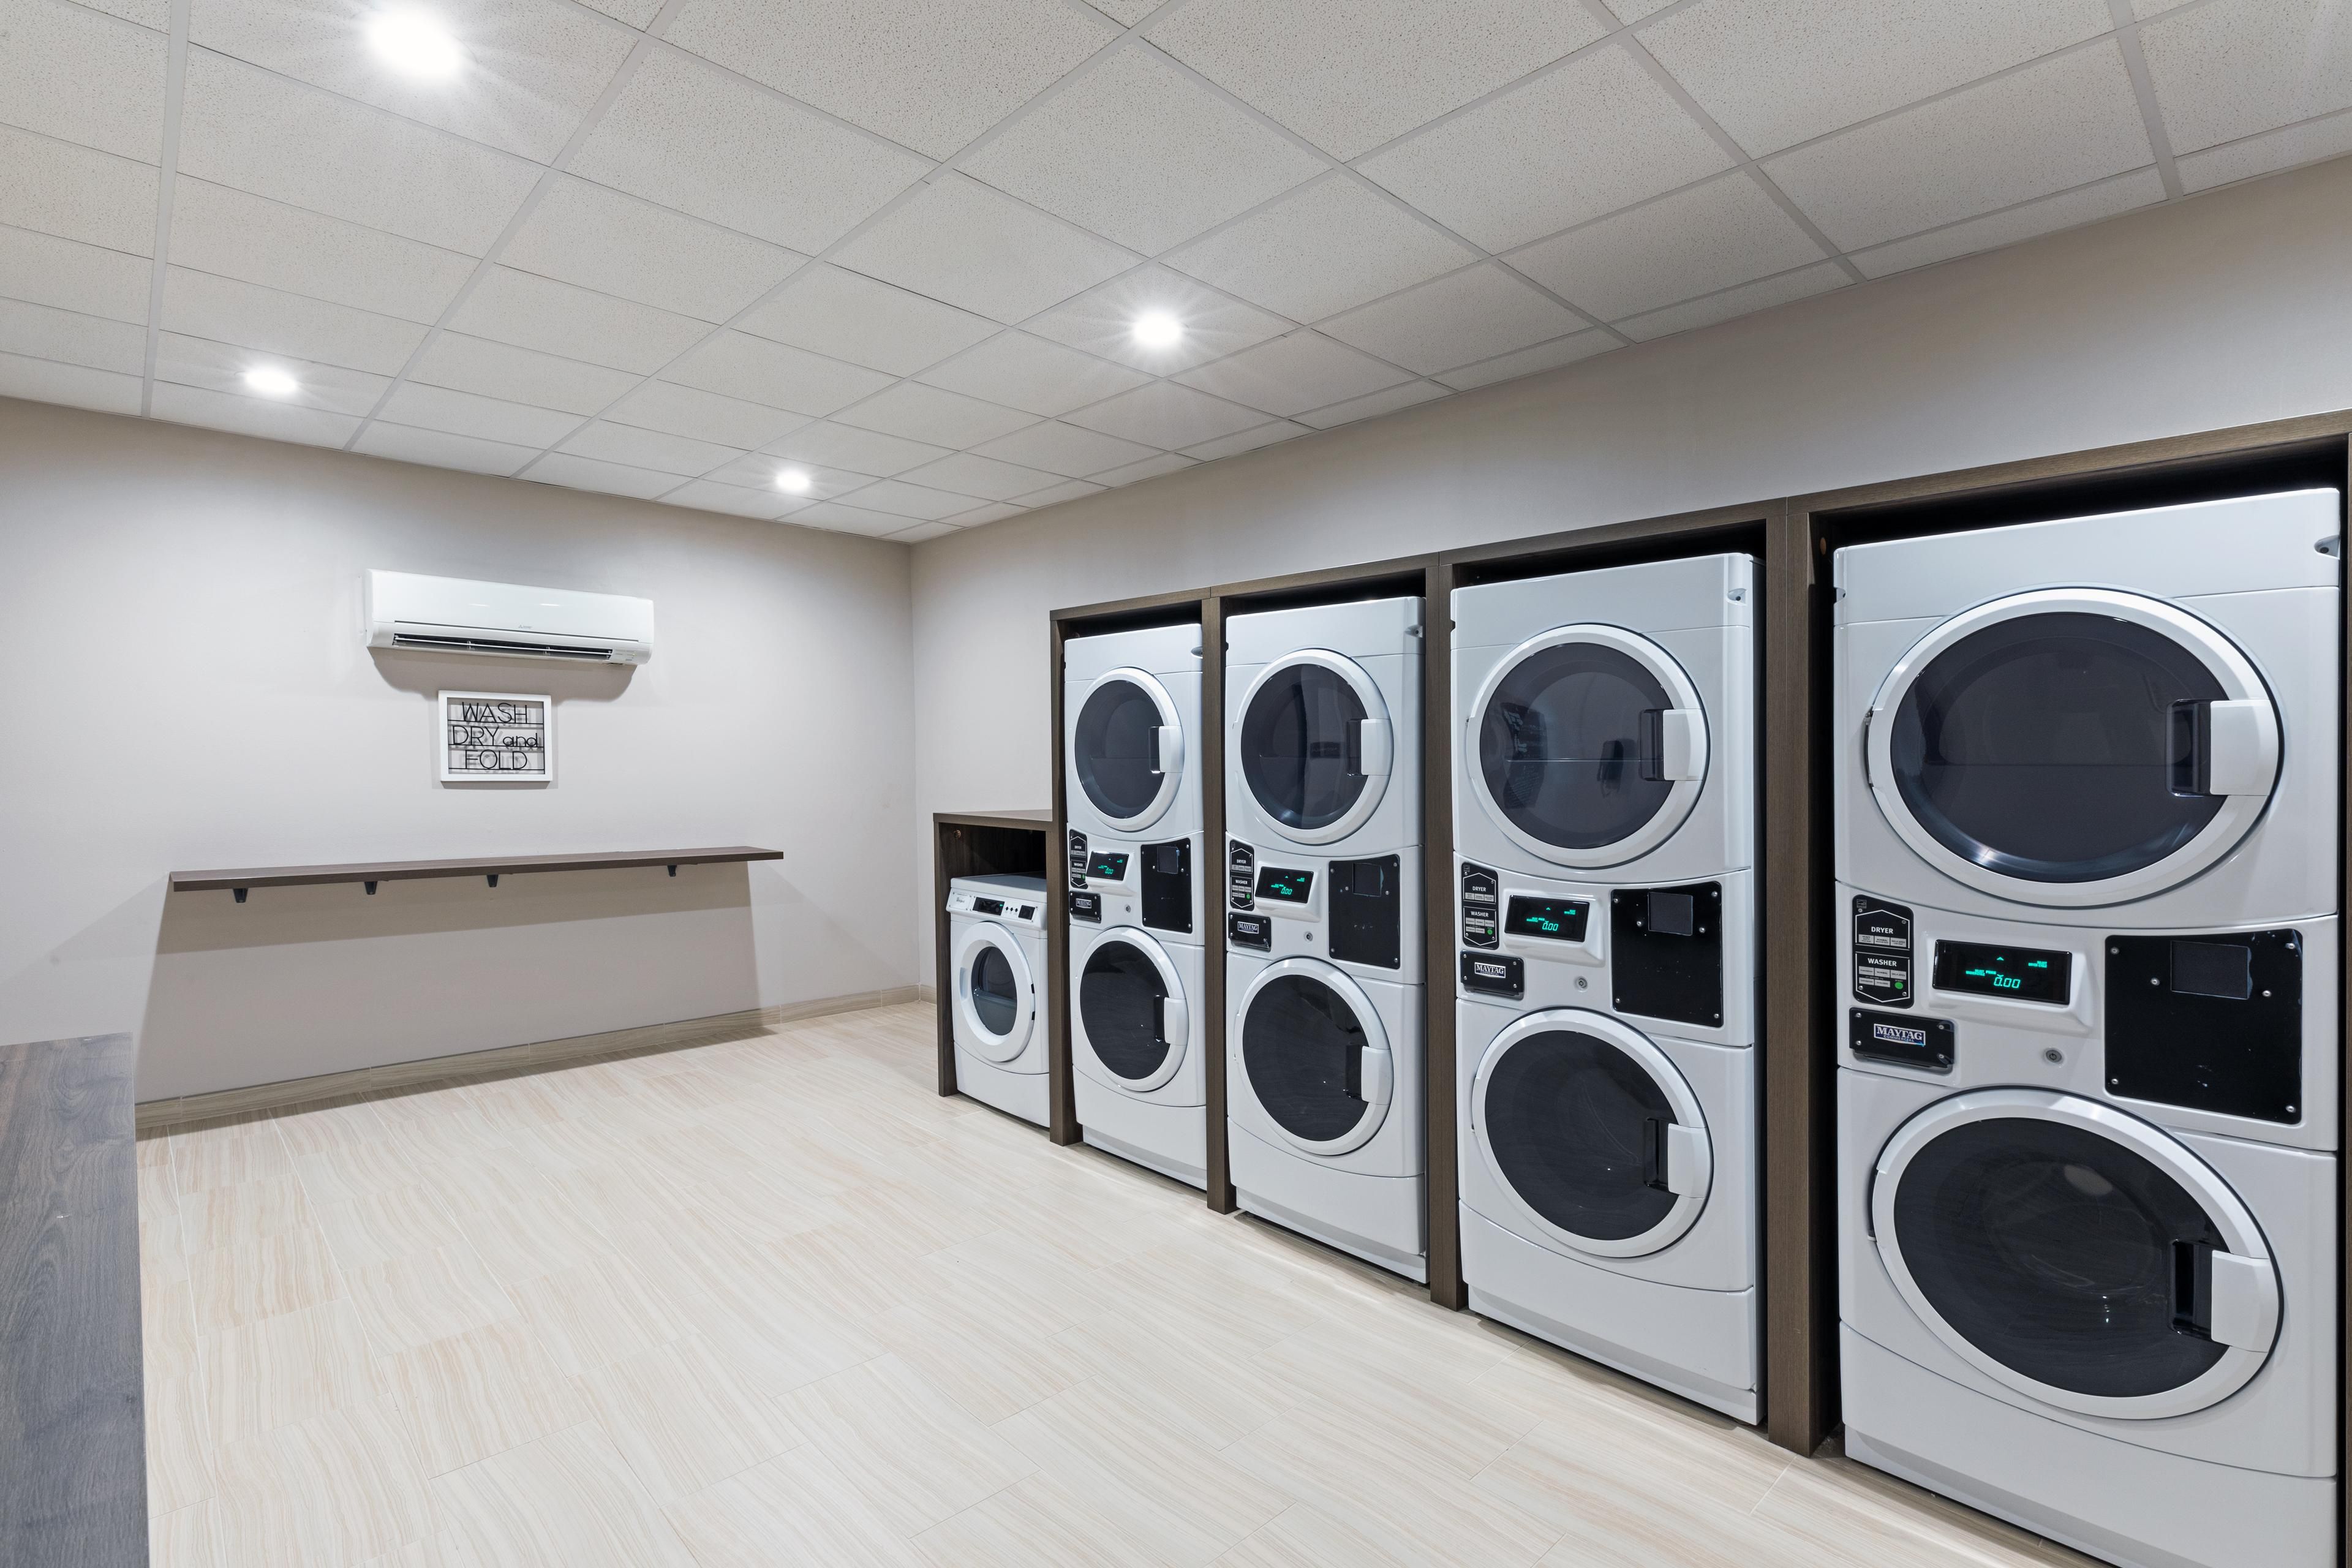 Our on-site laundry facility allows guests to pack light for their travel plans.